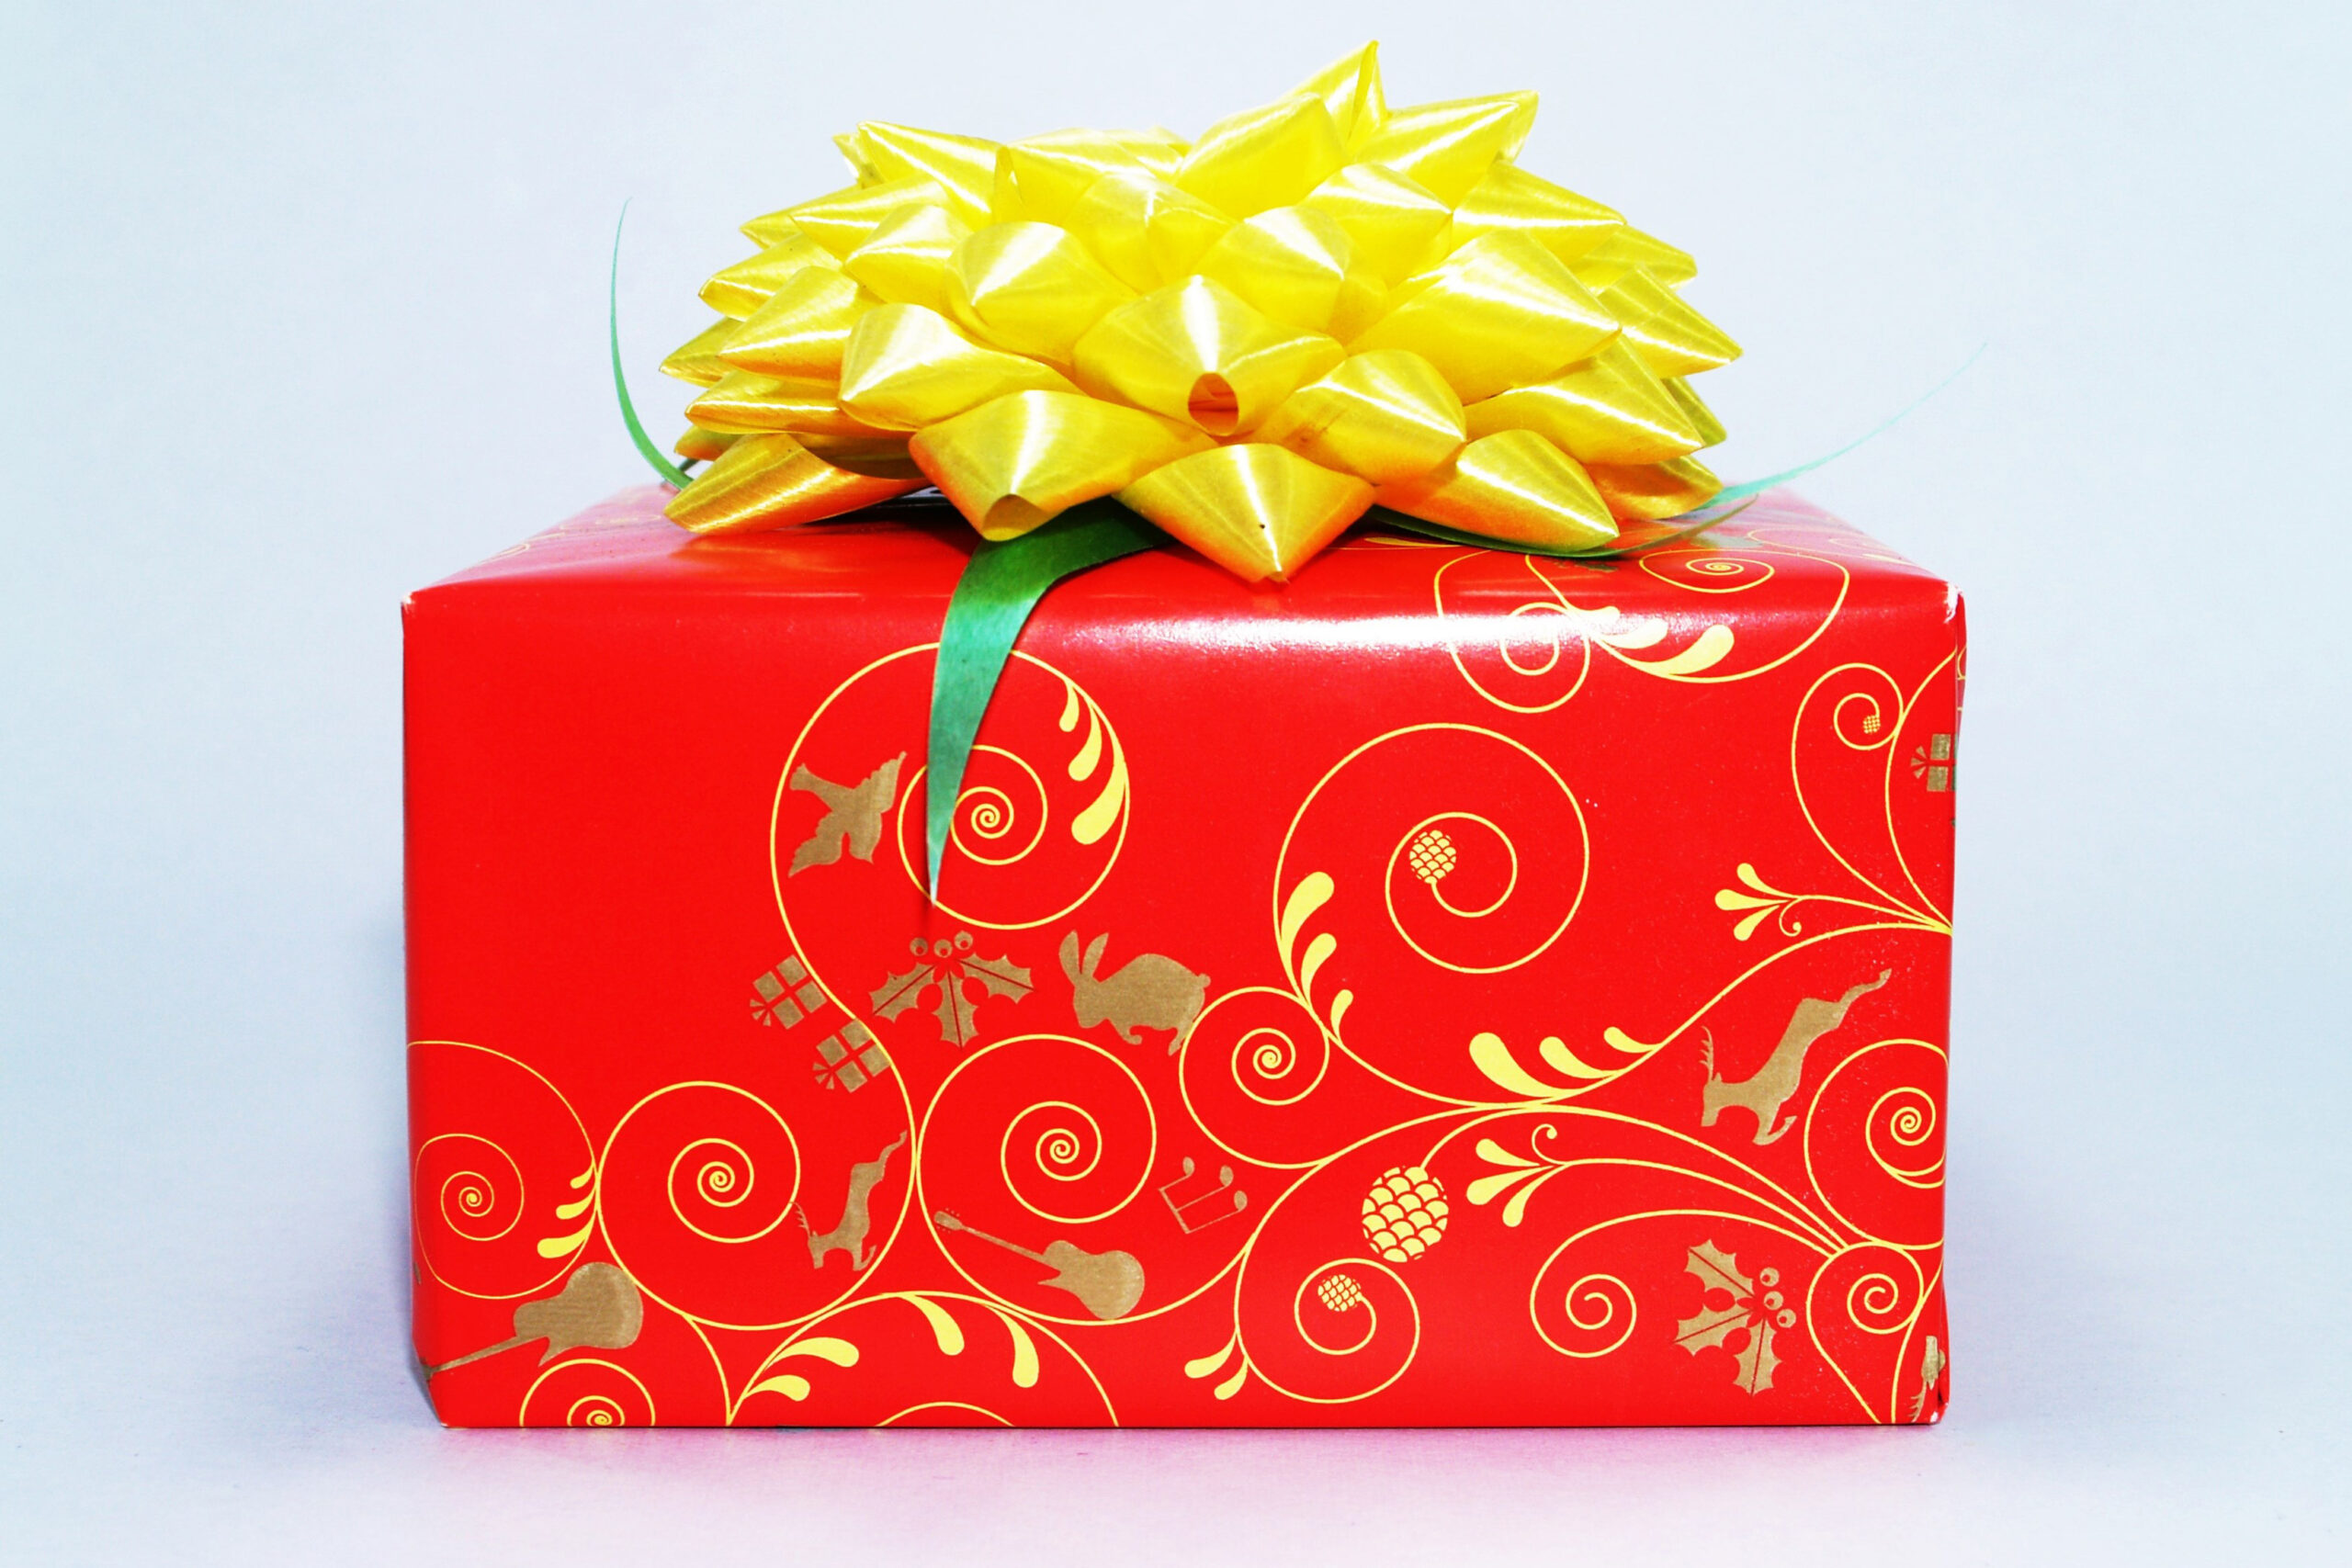 Taboos about gift-giving in China, Don't in gift-giving in China - CITS